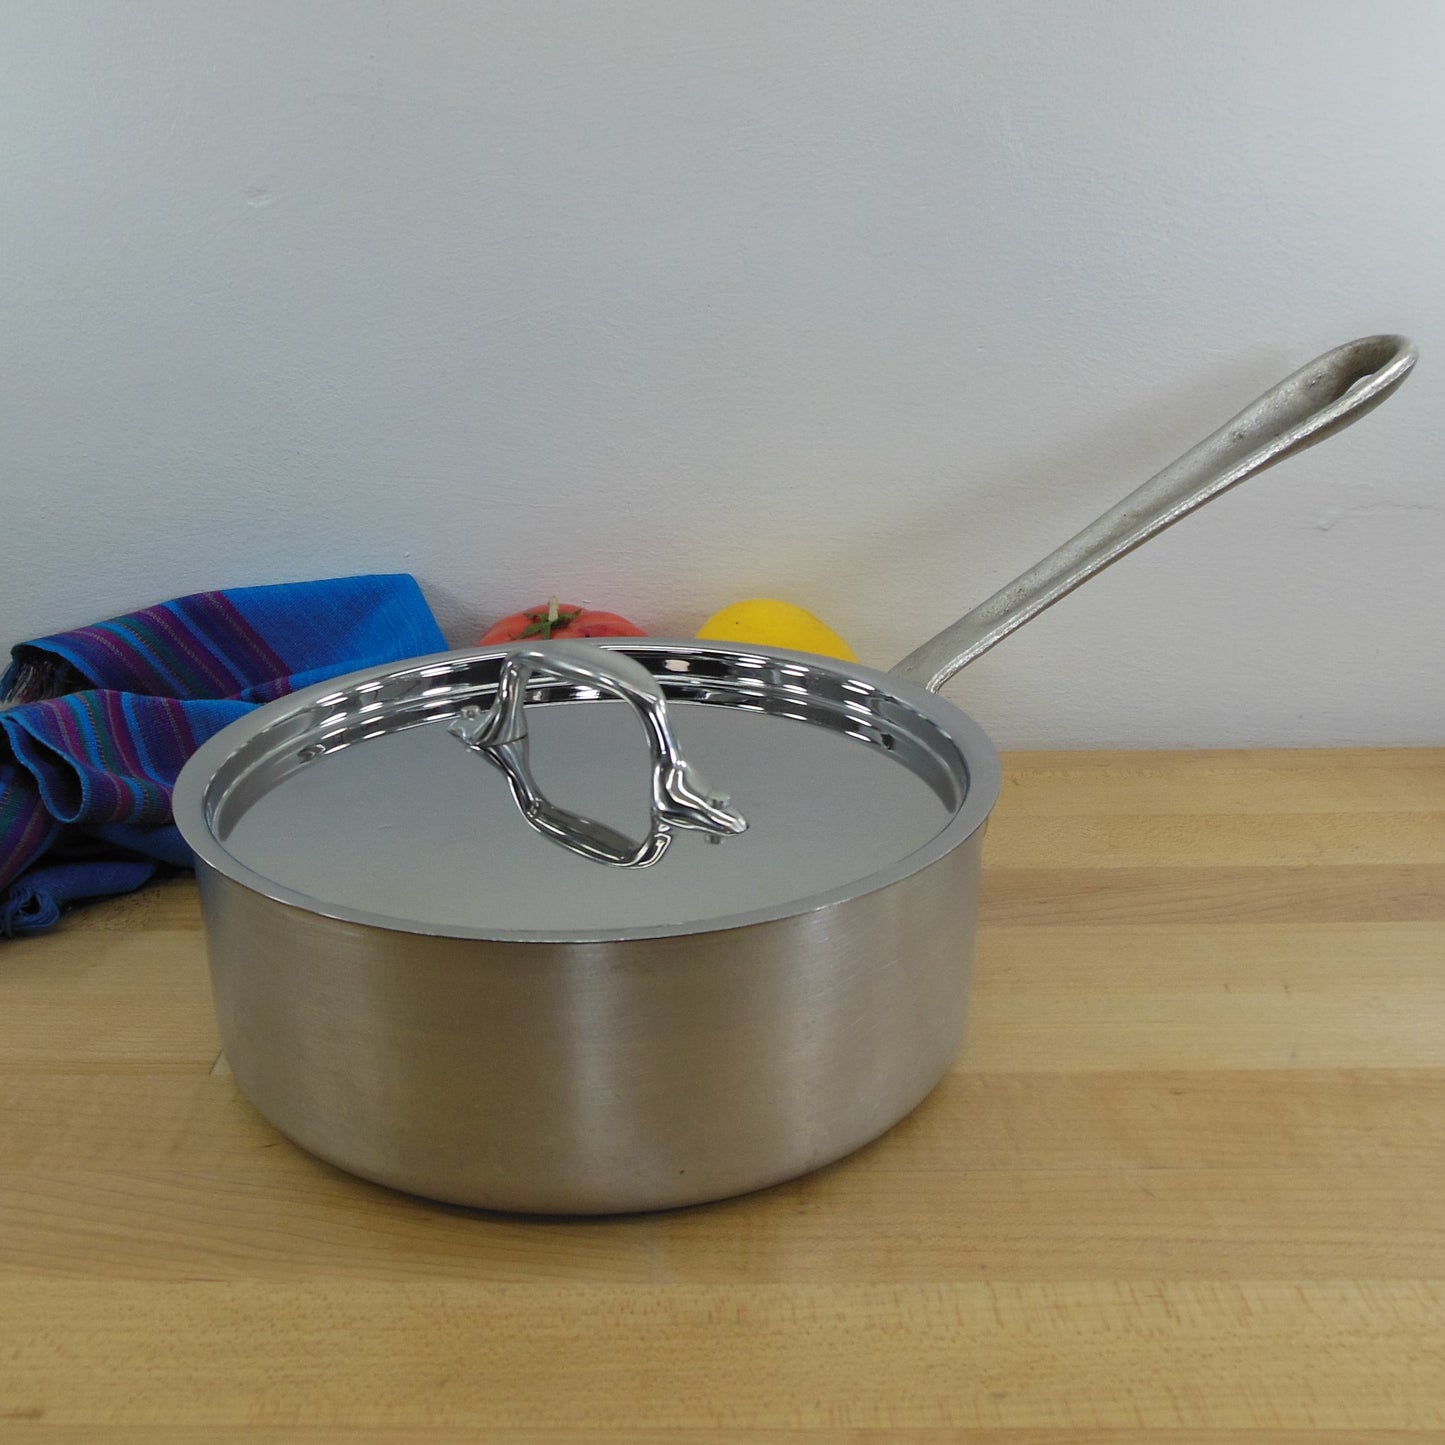 All Clad Metalcrafters 2 Qt Saucepan Pot w/ Lid #5202 Stainless